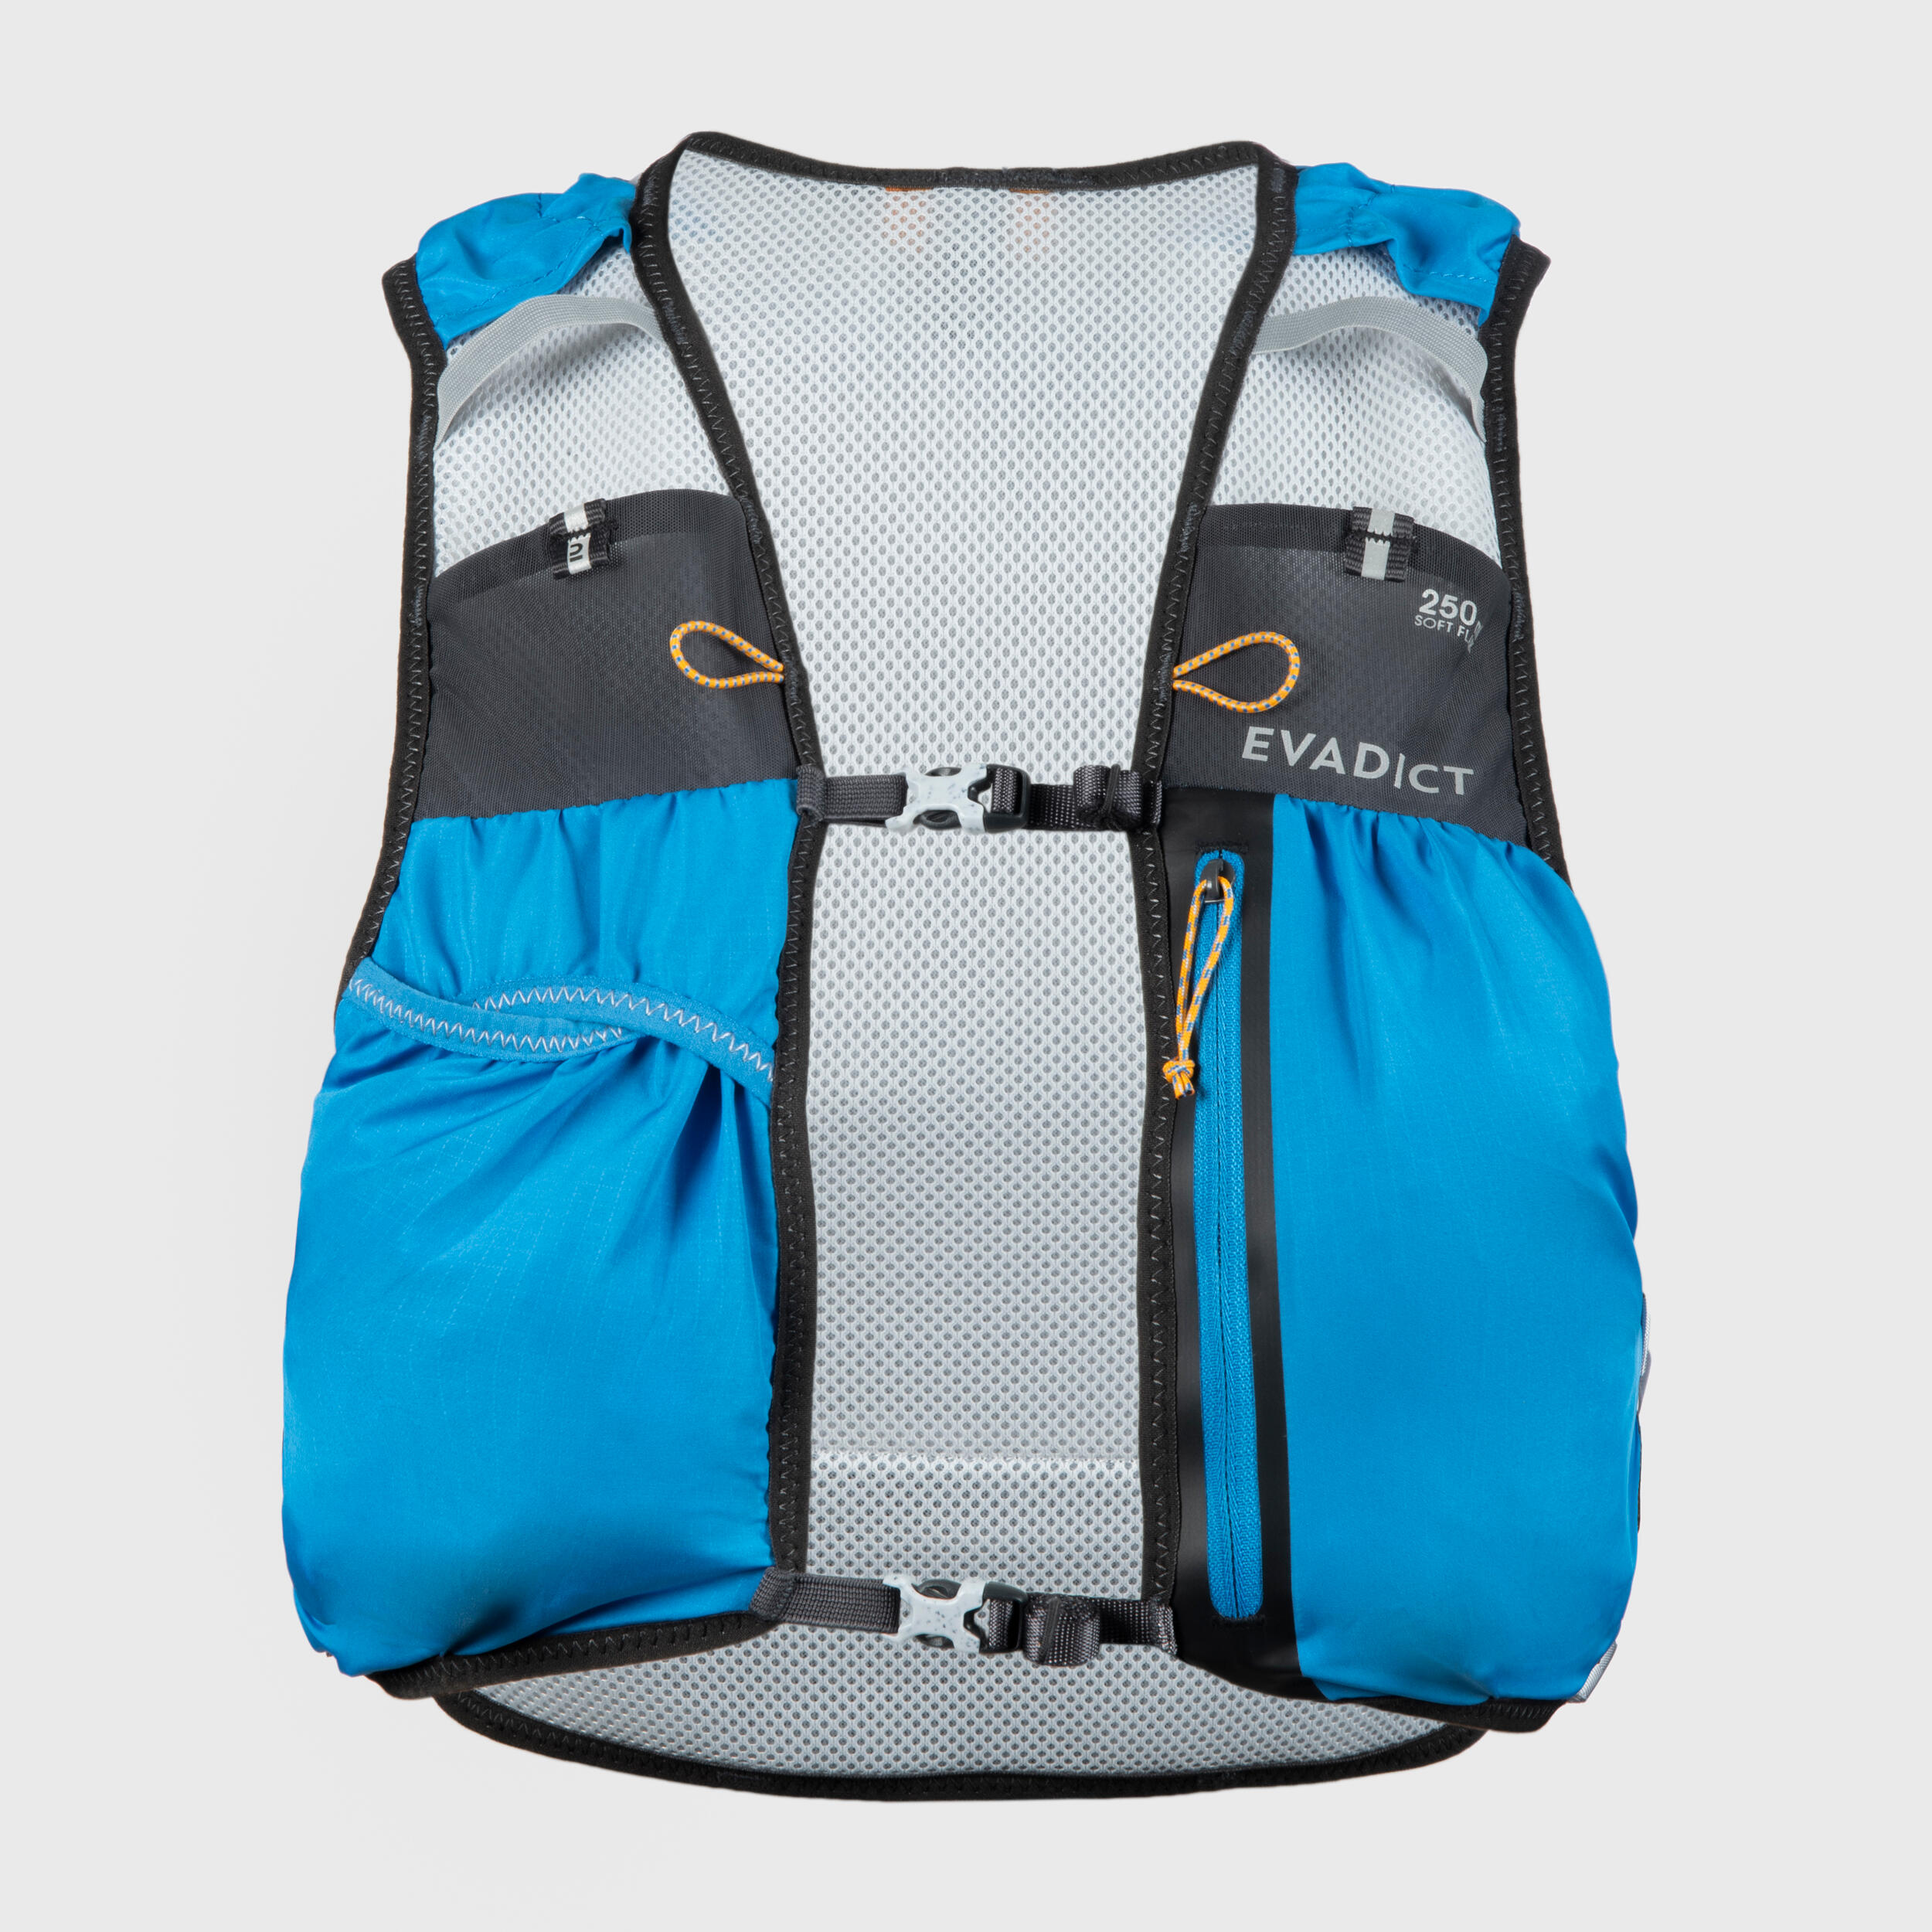 5L TRAIL RUNNING BAG - BLUE - SOLD WITH 1L WATER BLADDER 9/12